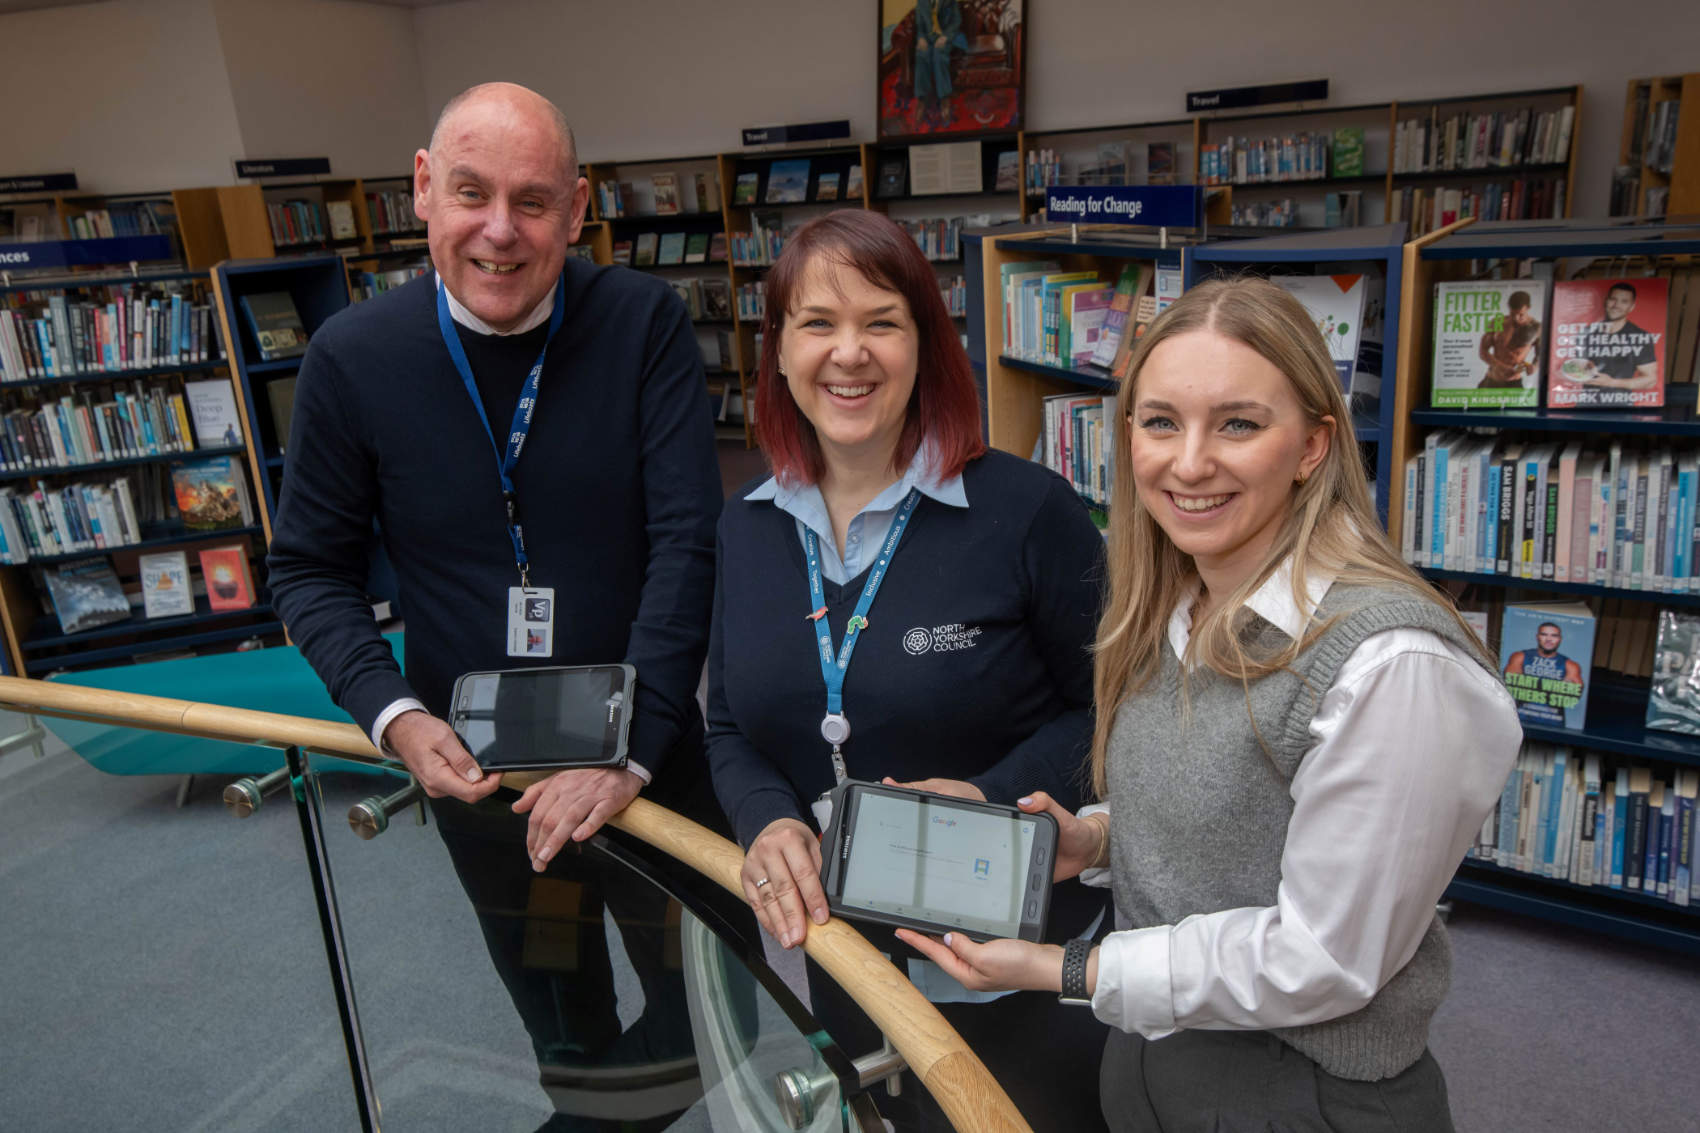 Vp plc’s group risk and sustainability director, Mathew Wood, North Yorkshire Council’s library supervisor at Harrogate Library, Catherine Skyvington, and Vp plc’s group risk and sustainability officer, Ellie Rose, at Harrogate Library where tablet computers were handed over to the Reboot North Yorkshire scheme